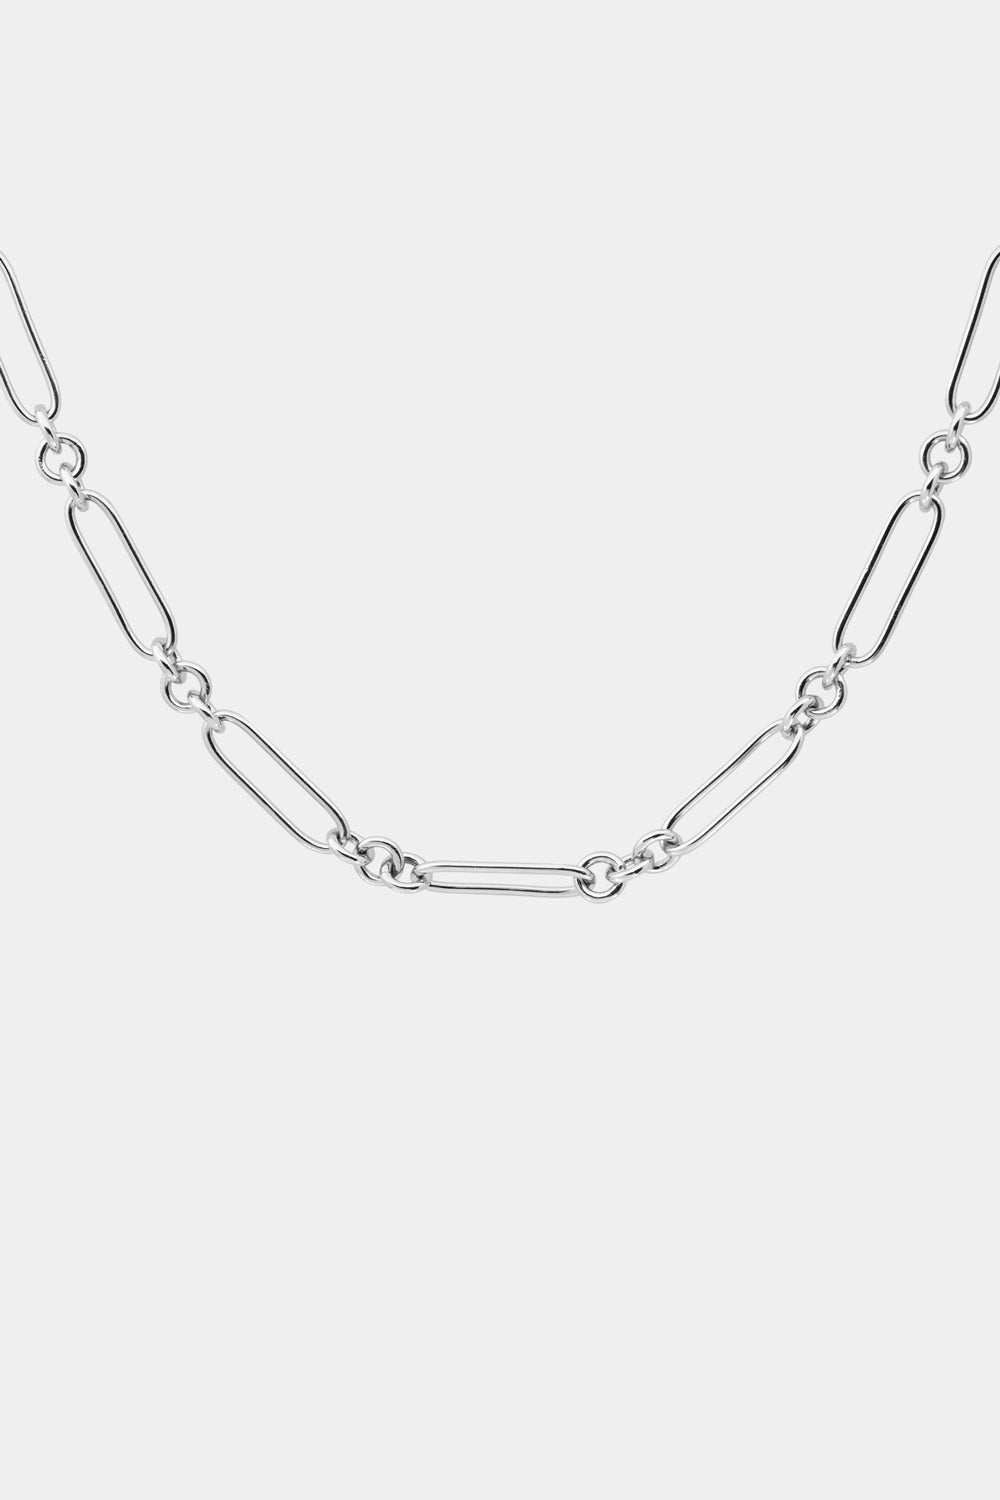 Lennox Necklace | Silver or 9K White Gold, More Options Available| Natasha Schweitzer